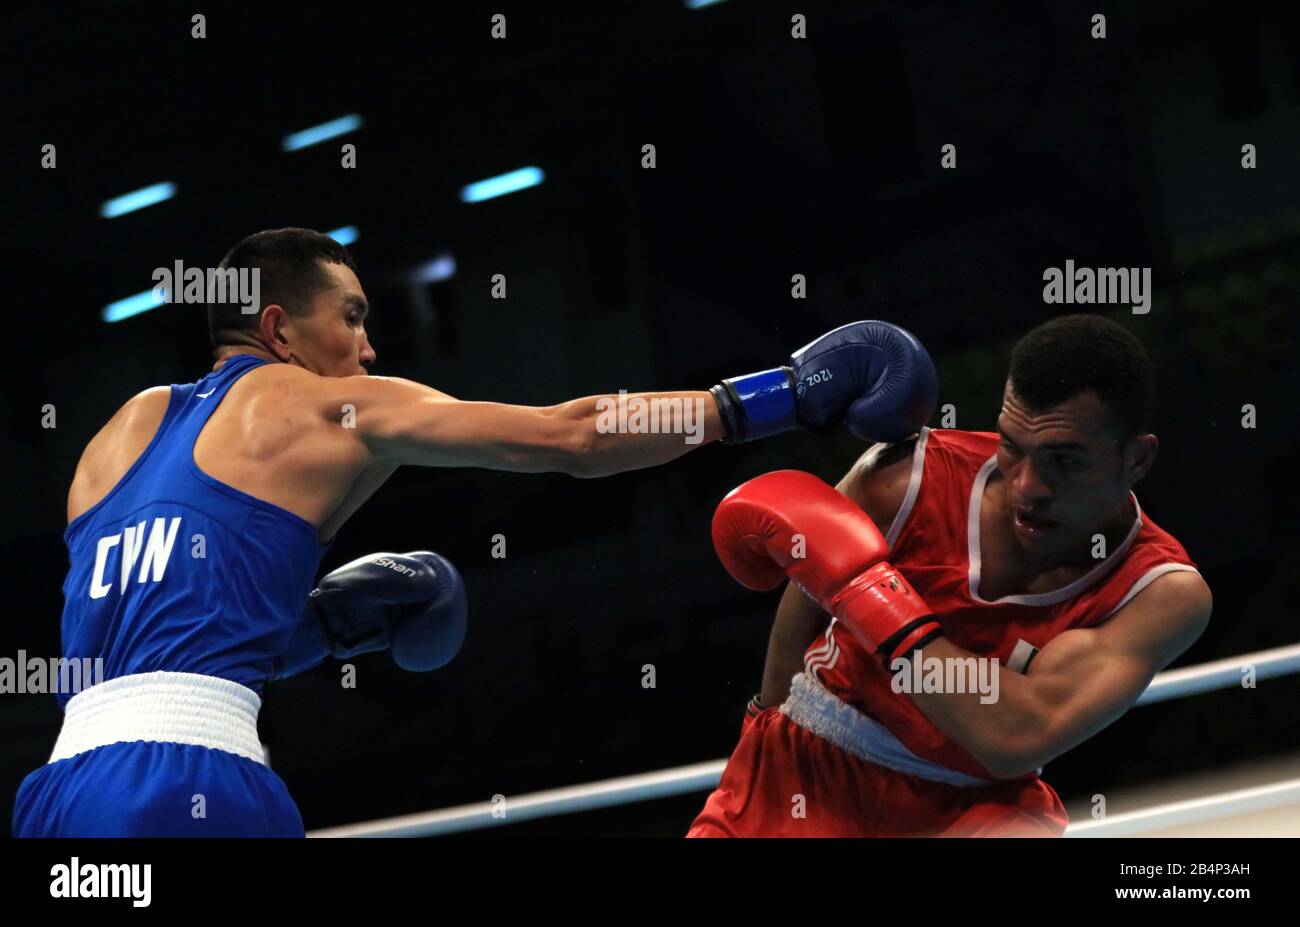 Amman, Jordan. 6th Mar, 2020. Maimaititu Ersun Qiong (L) of China competes  with Zaib Gul of Pakistan during their men's Welterweight (63-69kg)  Preliminaries bout at the Asian/Oceanian Boxing Qualification Tournament  for 2020